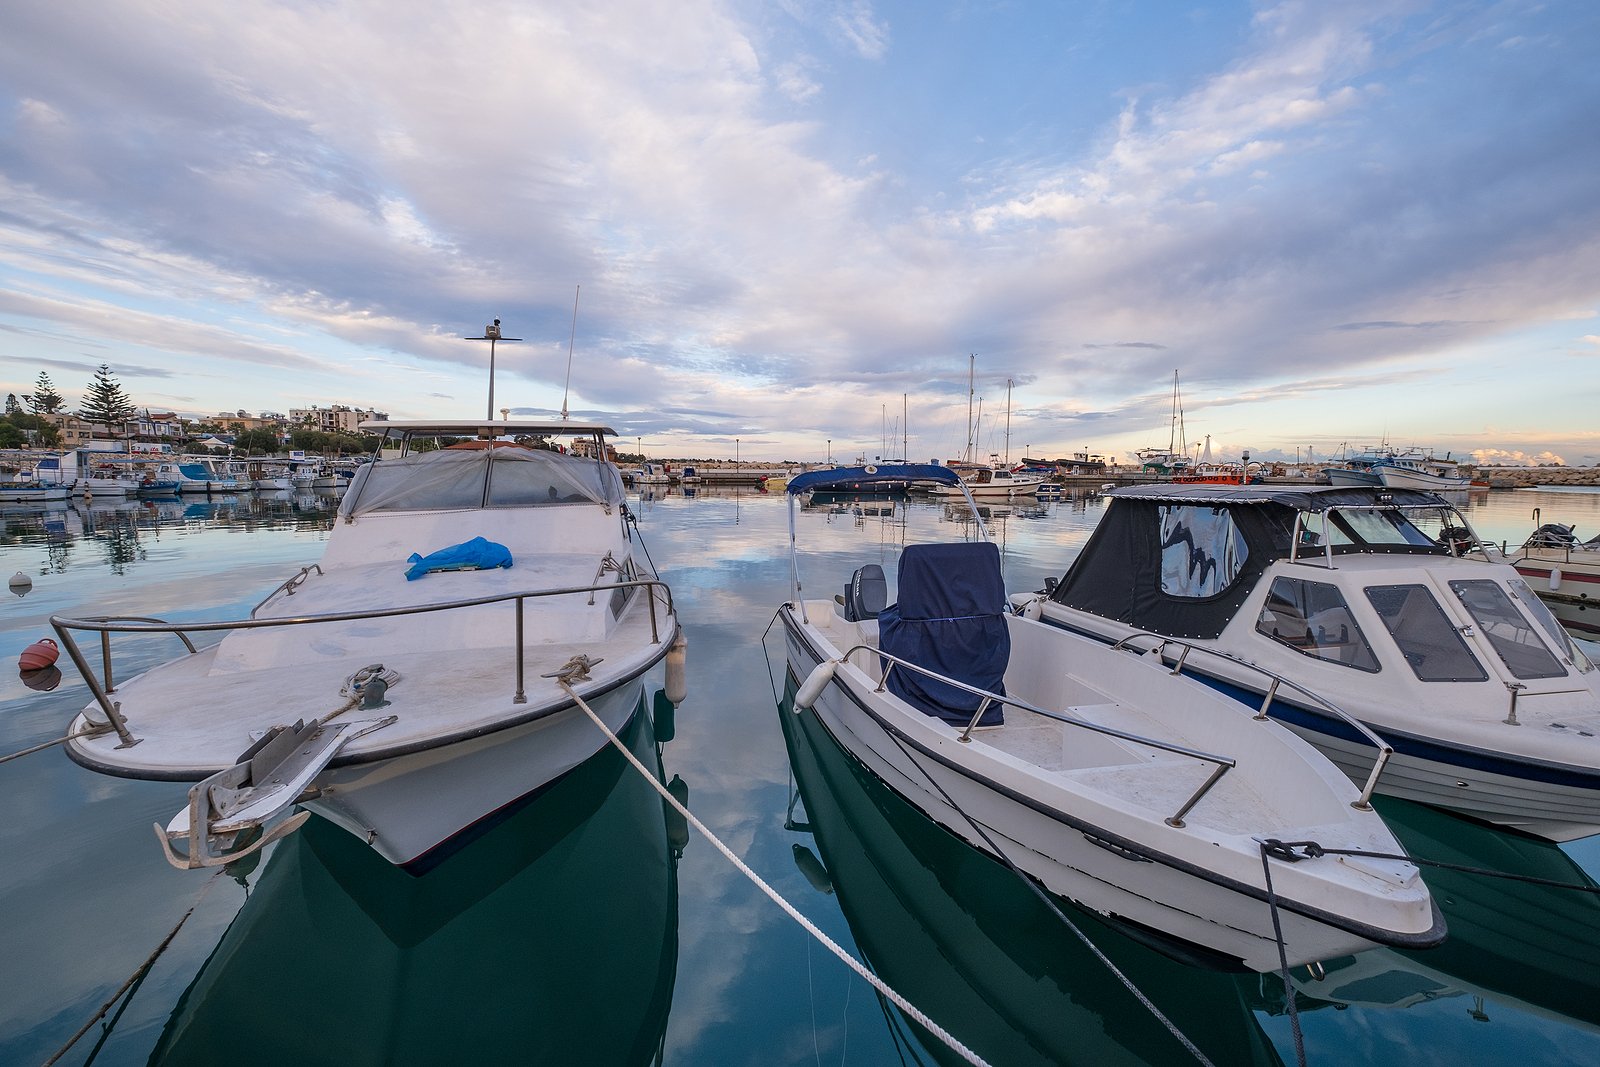 Boat marina showing yachts and speed boats after using an effective boat marketing strategy